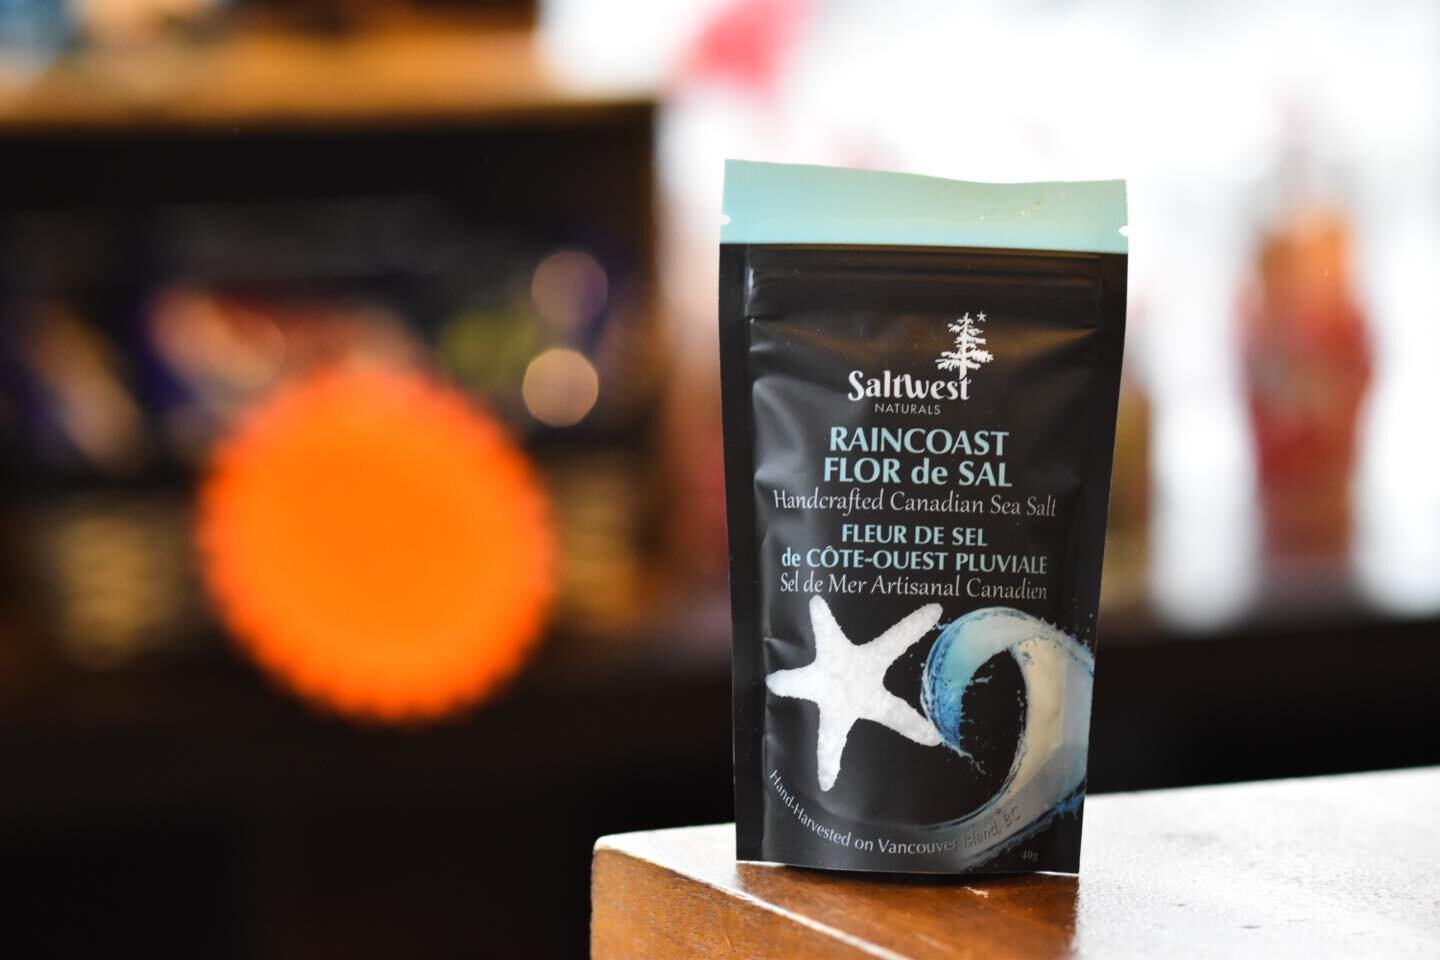 Sprinkle a little perfection on every dish! The Raincoast Flor de Sal is exactly what your taste buds are calling for - come see us in the tasting room and shop our vast collection of Saltwest Naturals goodies!